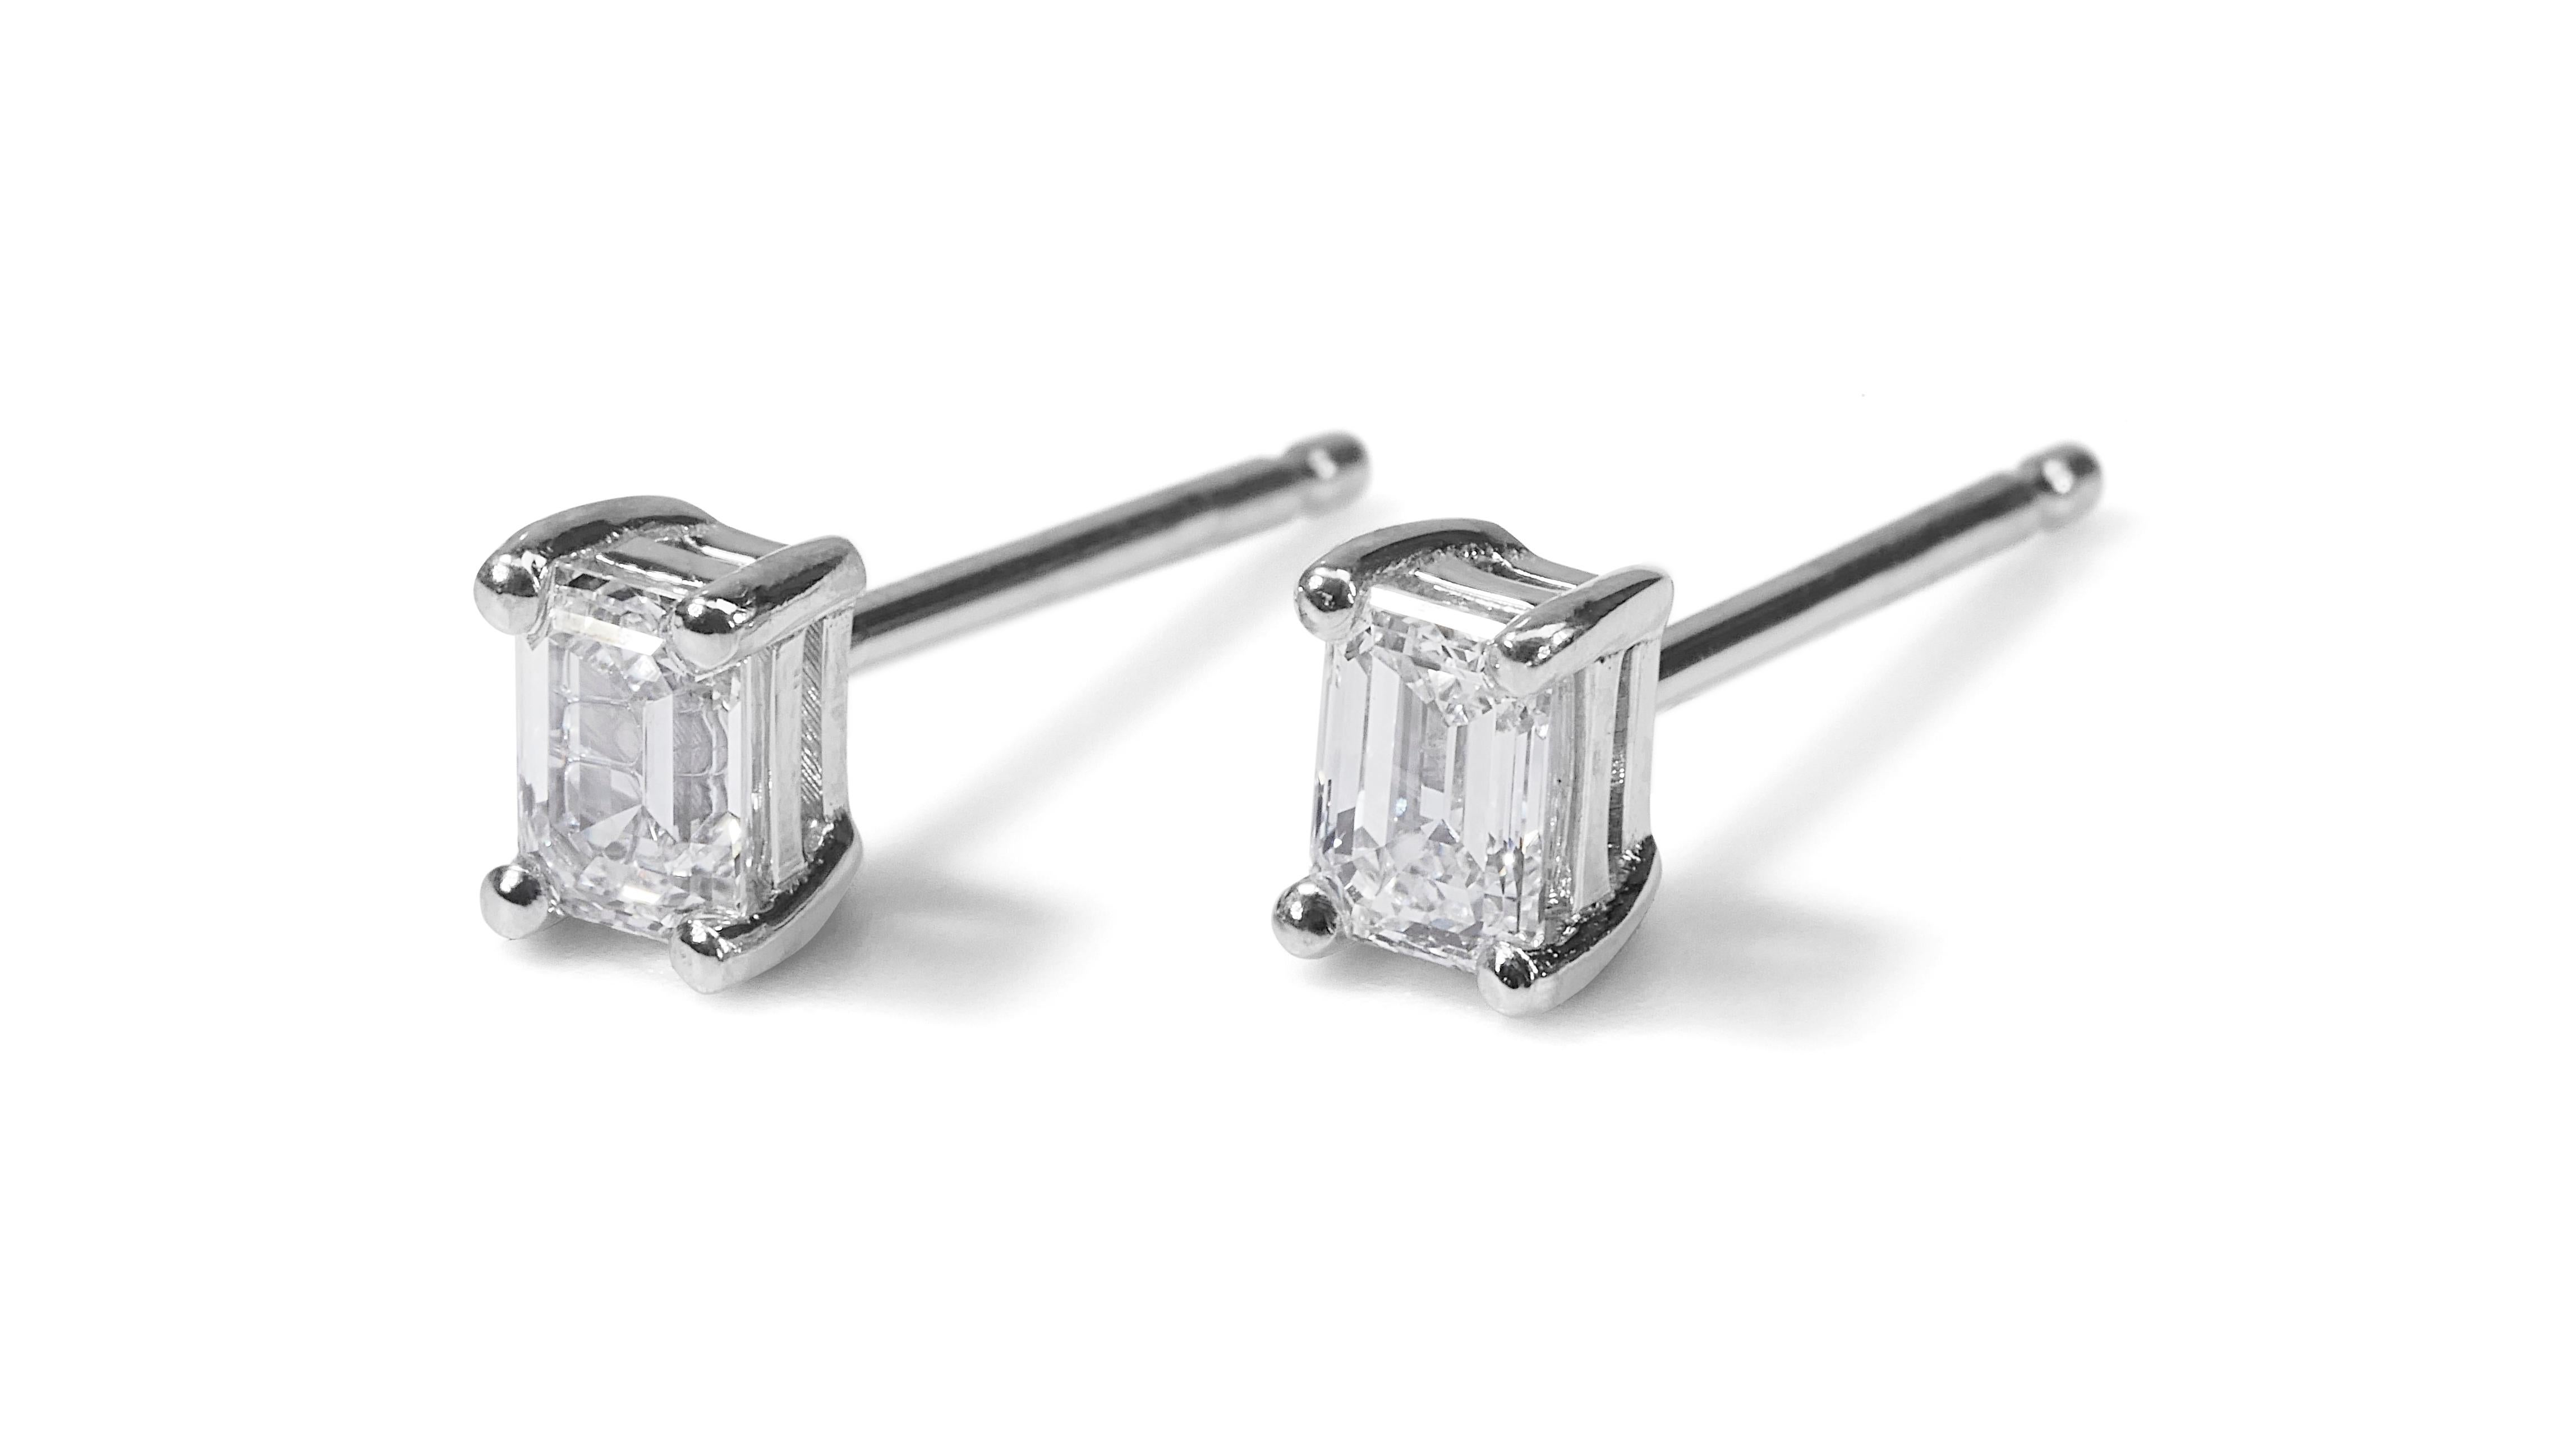 Radiant 18K White Gold Natural Diamonds Stud Earrings w/1.00ct - GIA Certified

These radiant stud earrings showcase a stunning duo of diamonds, meticulously selected for their exceptional quality. With a total carat weight of 1.00 carat, these